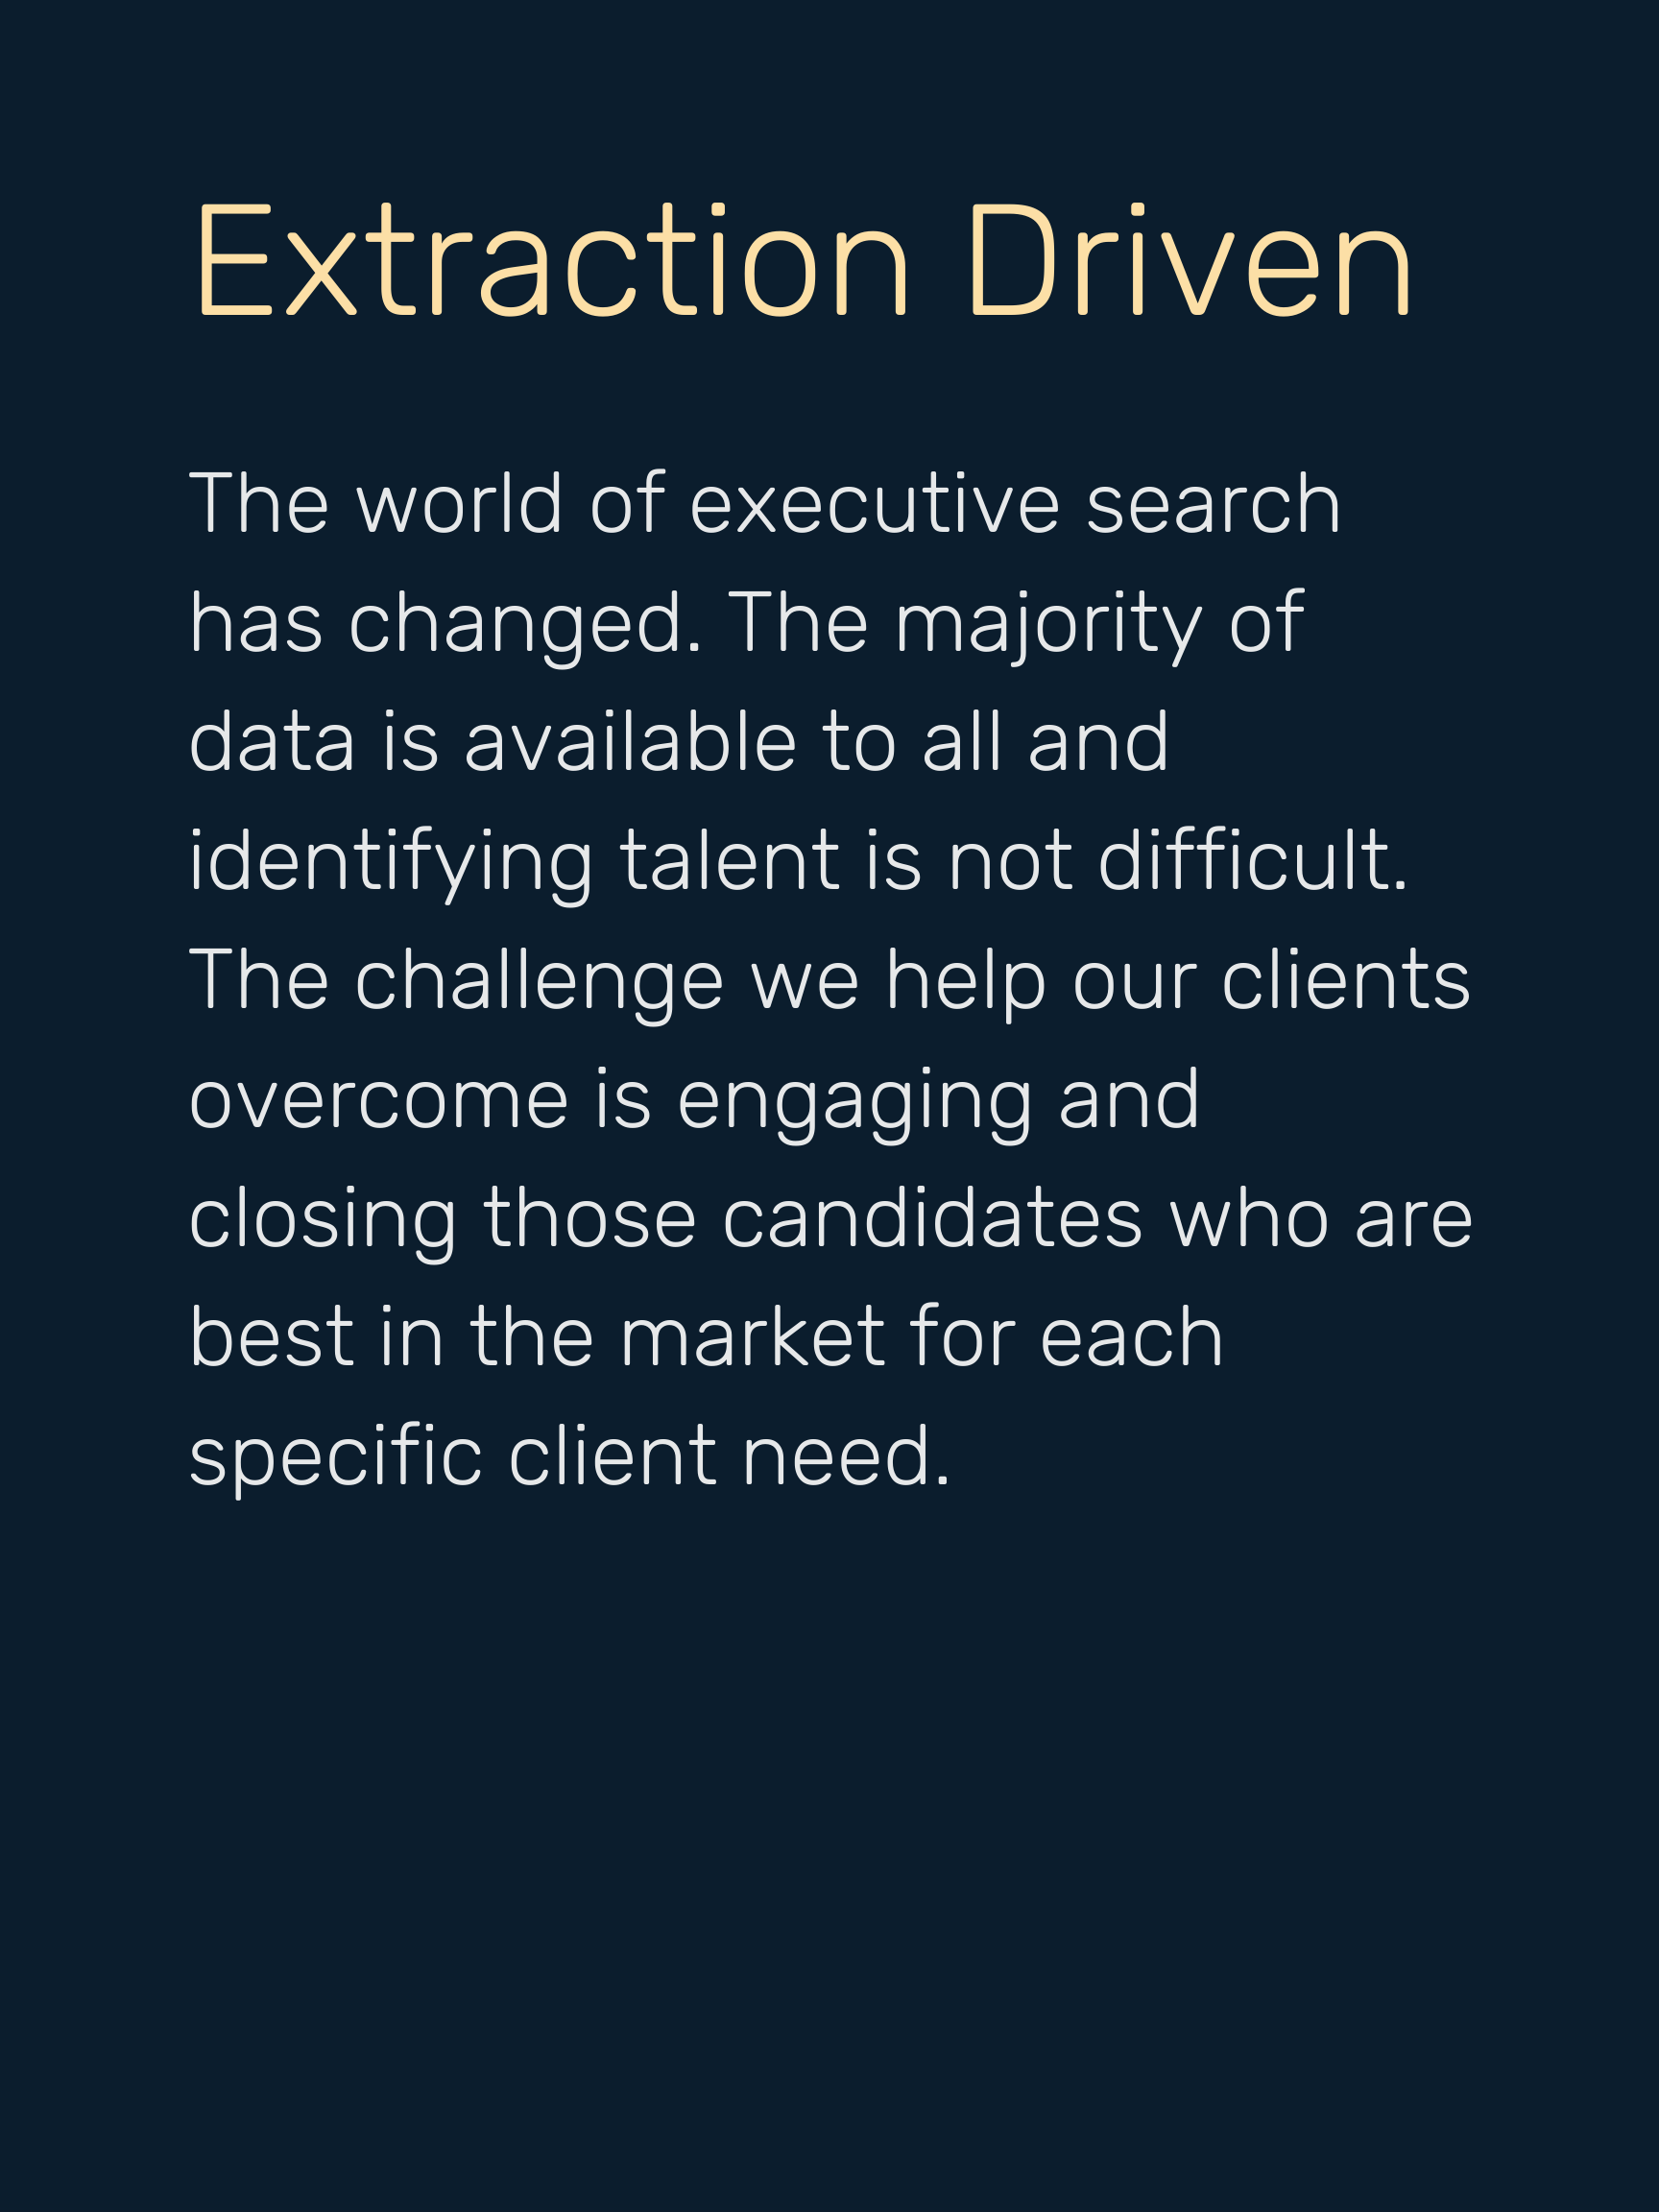 Extraction Driven